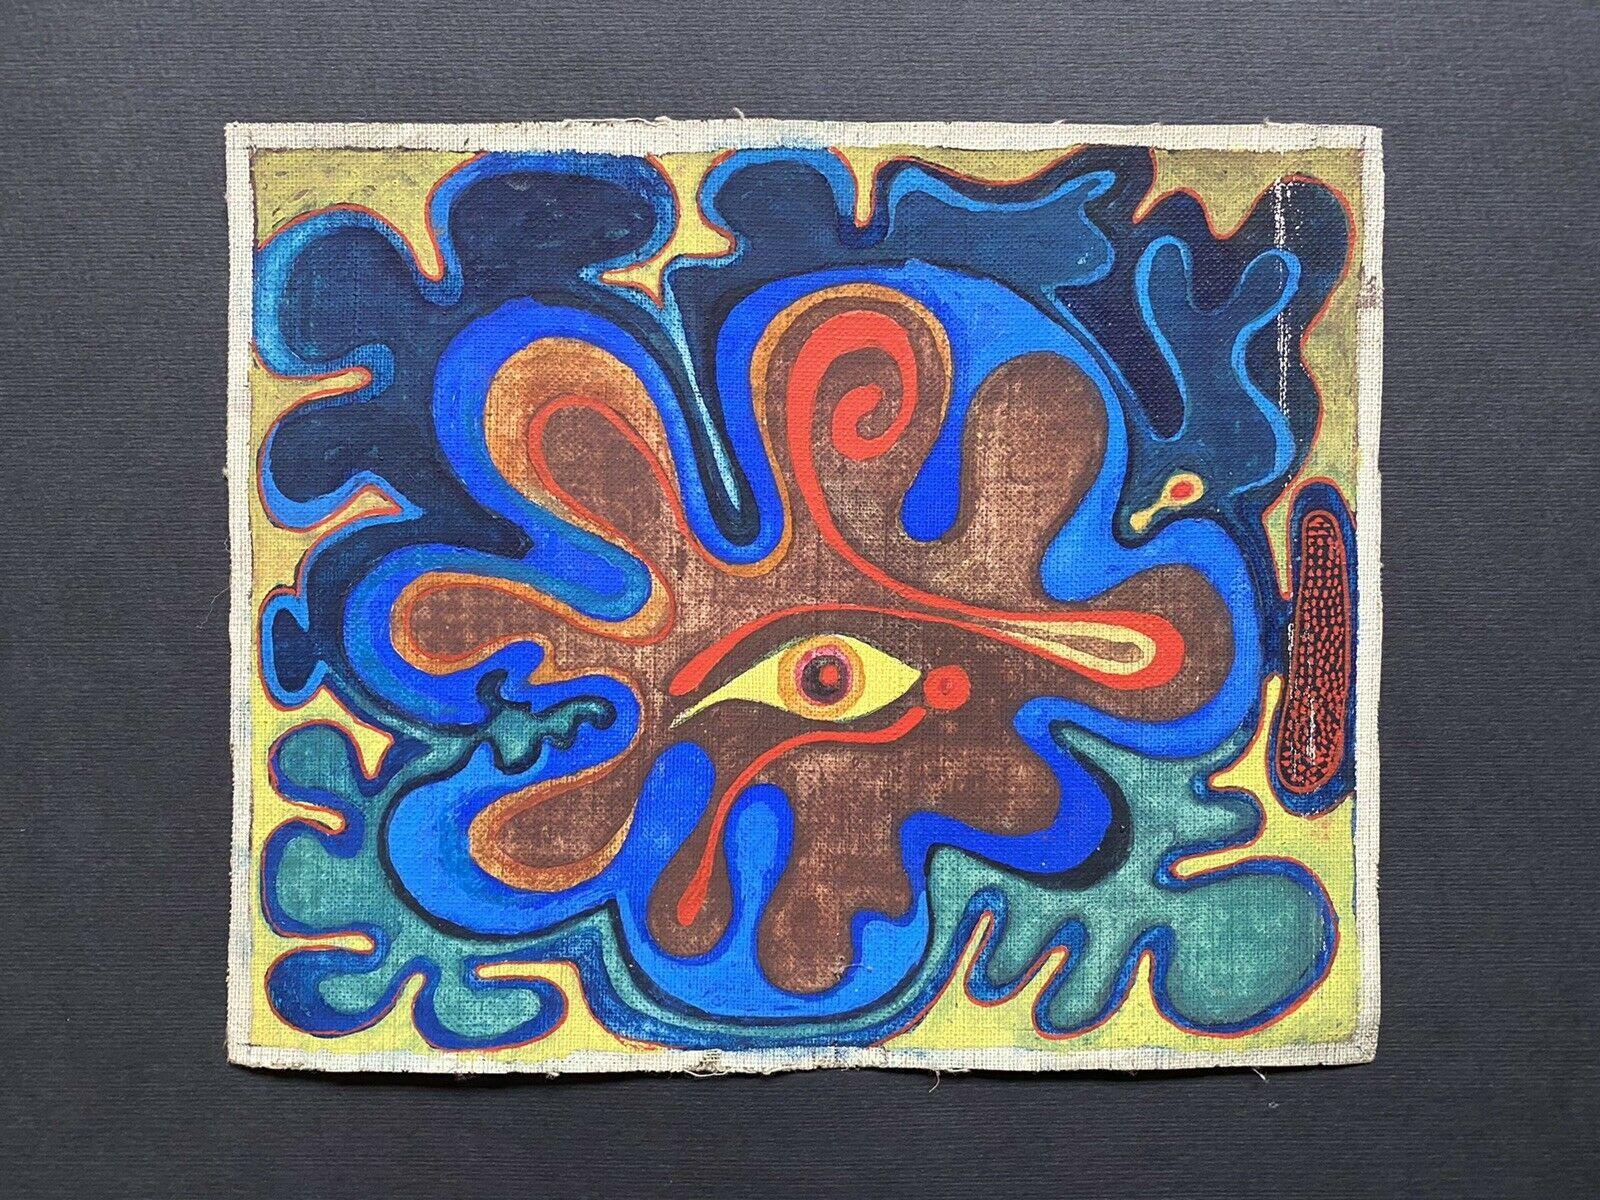 ORIGINAL 1970'S FRENCH PSYCHEDELIC PAINTING - ABSTRACT EYE - Painting by Claude Lagouche